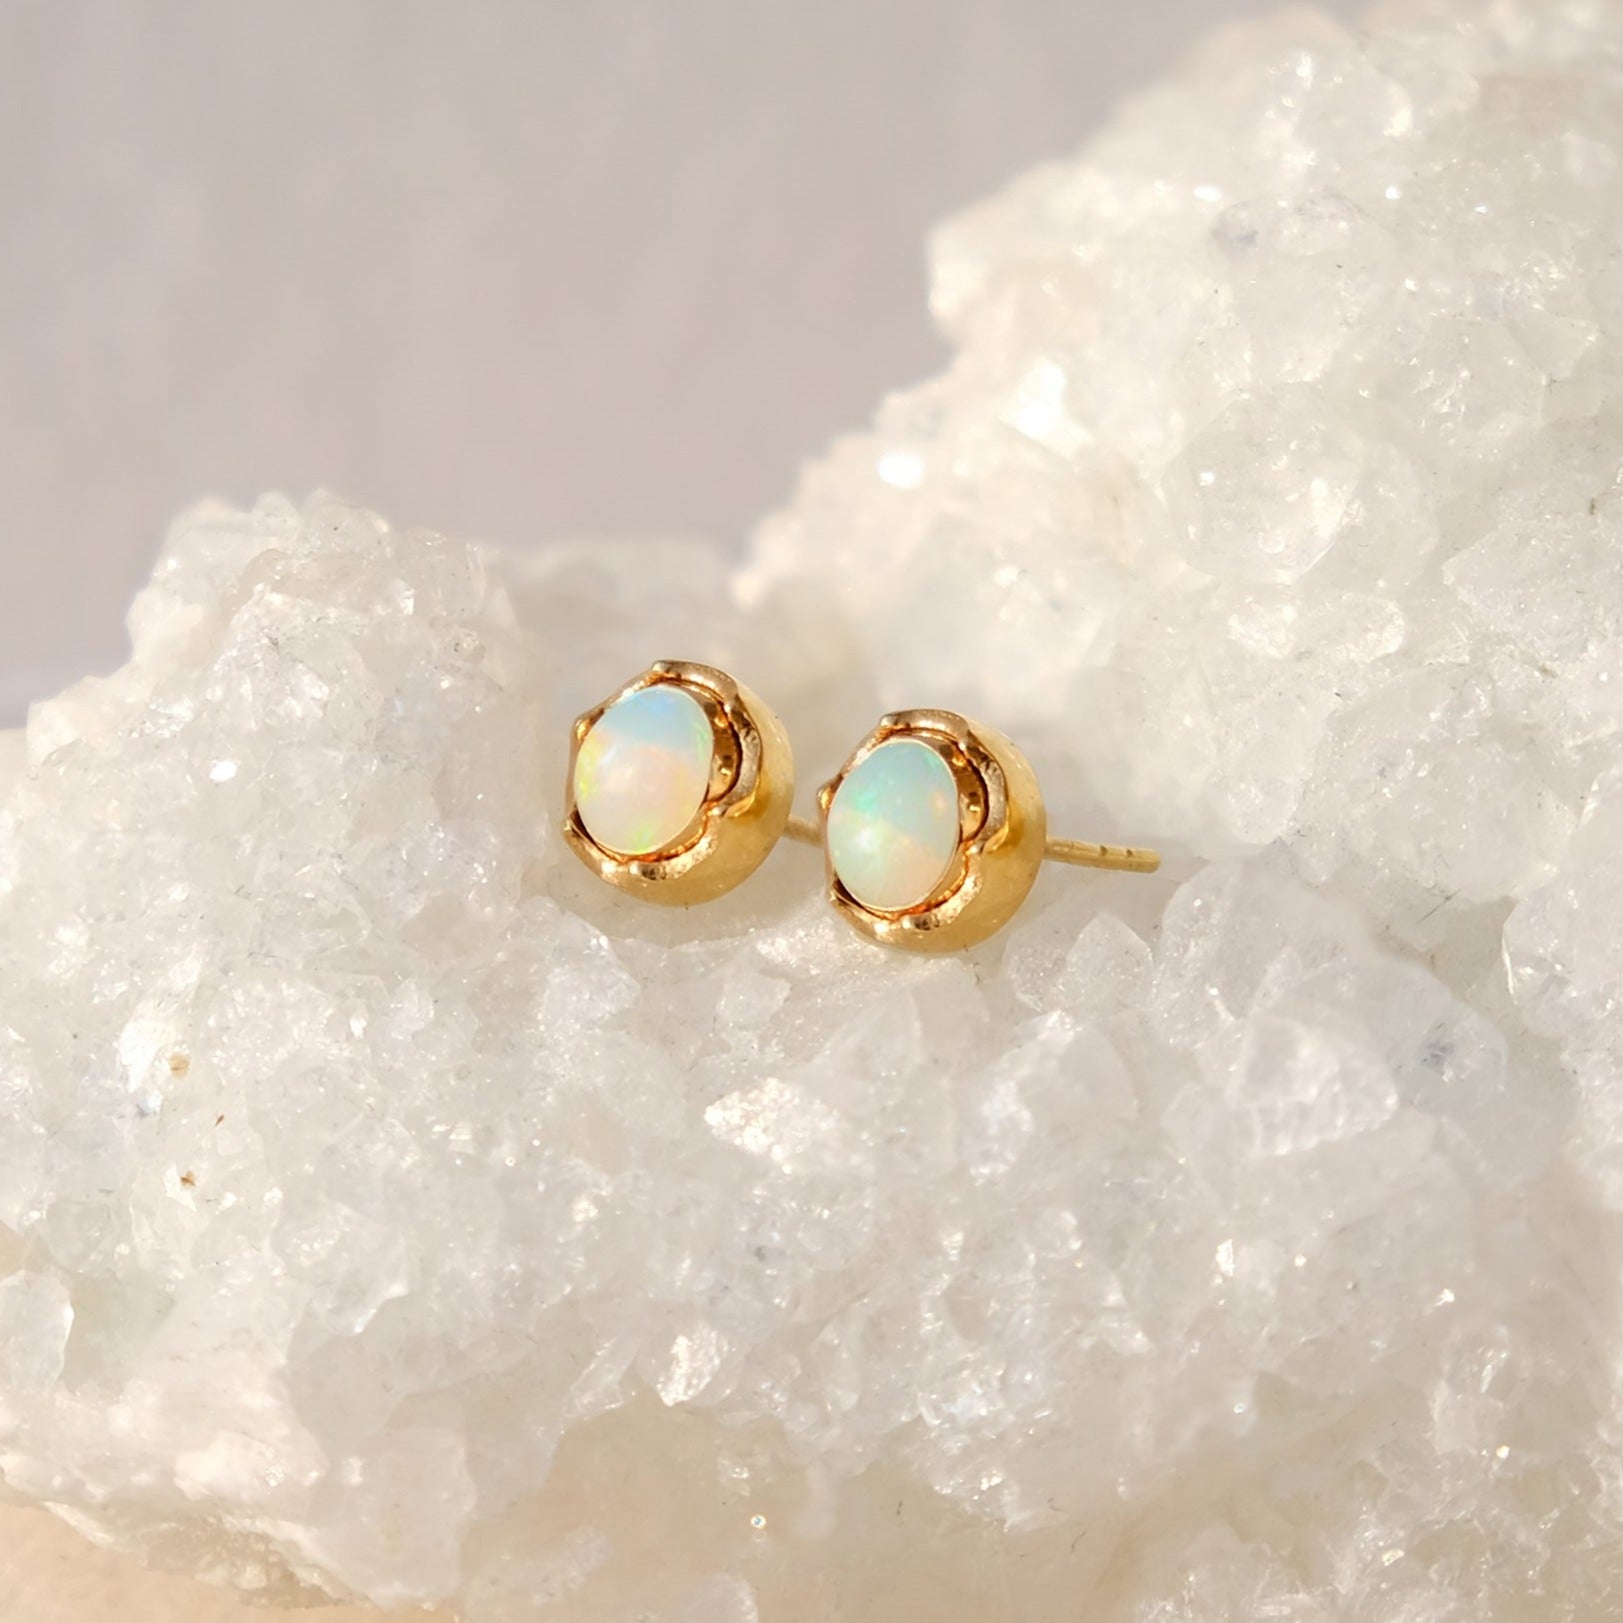 GOLD AND OPAL STUD EARRINGS